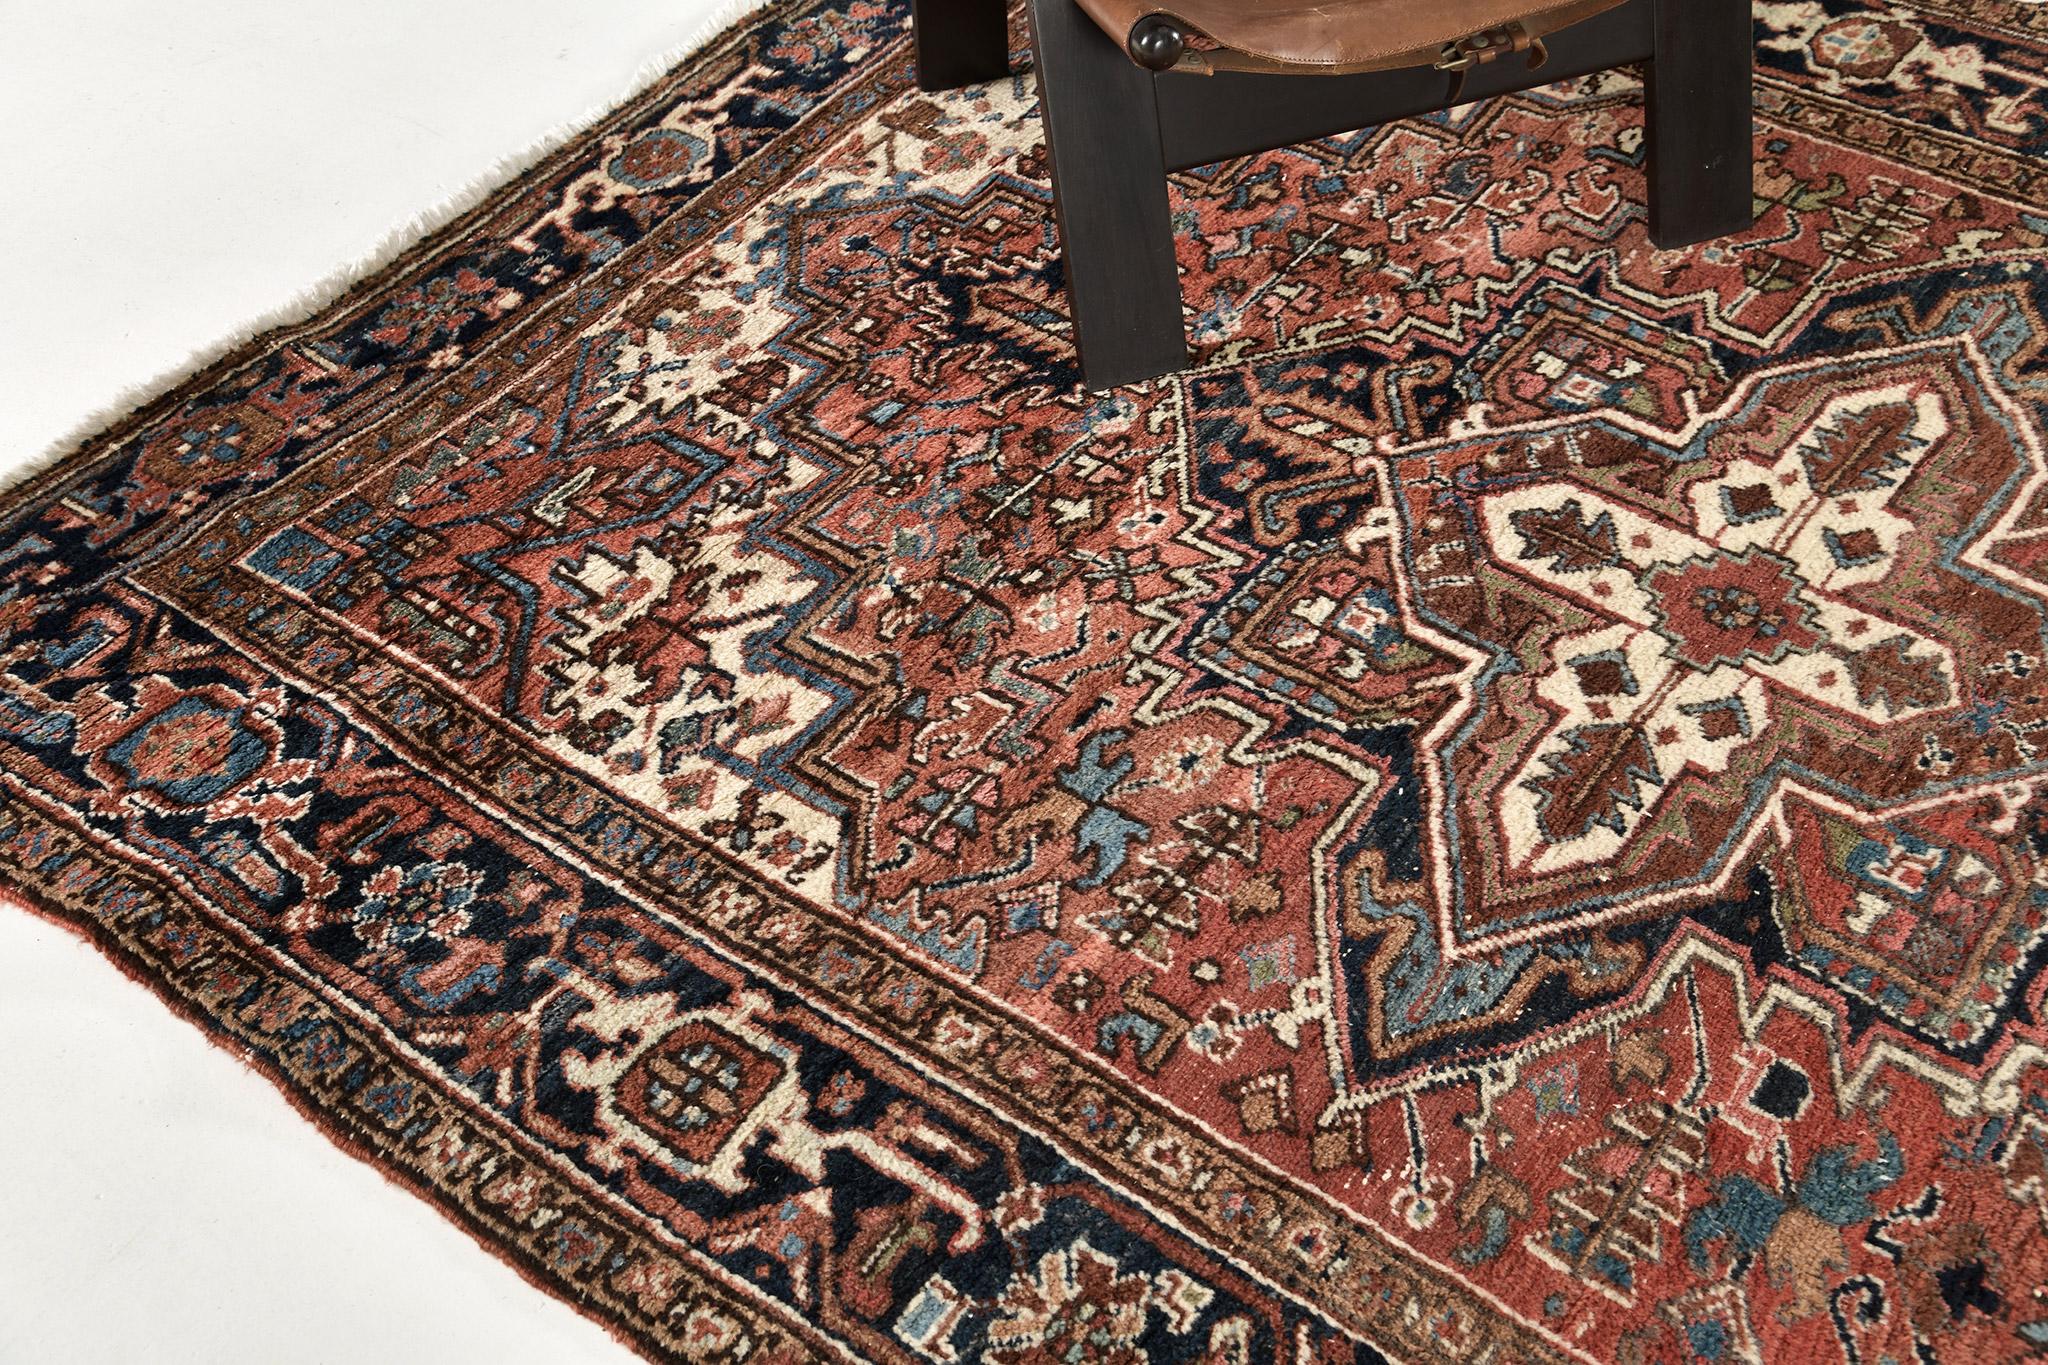 This mesmerizing Antique Persian Heriz rug features a rust blend of colours. It is distinguished by its intricate design scheme and details highlighting a botanical medallion that creates a fascinating piece that will surely captivate the viewer’s